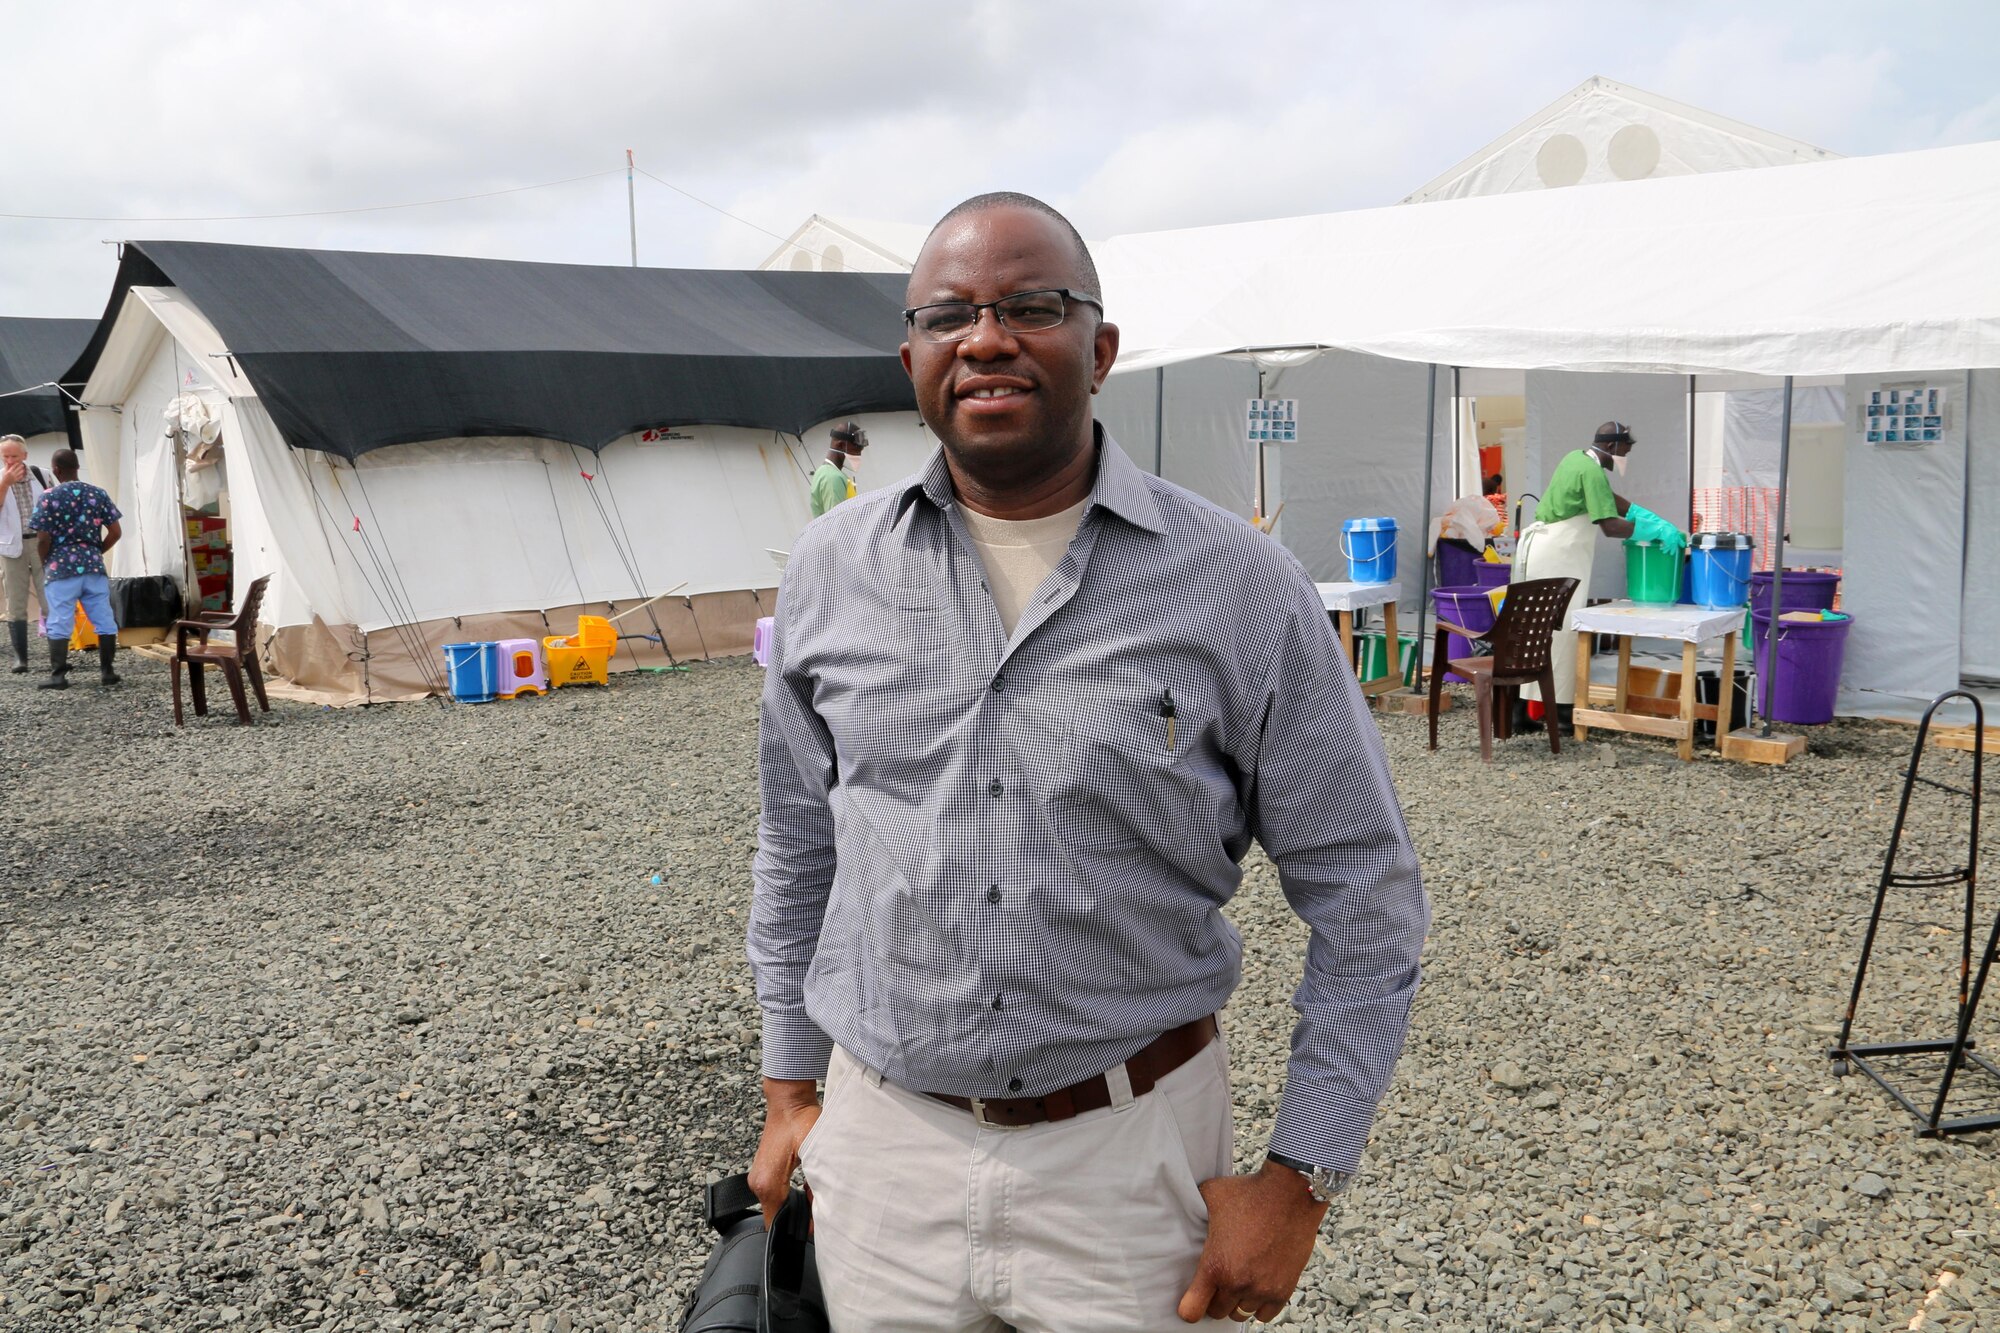 Maj. Francis Obuseh poses for a photo at a field hospital Sept. 19, 2014, in Monrovia, Liberia. Obuseh is an epidemiologist and international health specialist with the U.S. Air Forces in Europe and Air Forces Africa Surgeon General’s Office and was sent to Liberia to conduct a site survey for a field hospital to be used in the fight against the epidemic Ebola outbreak there. (Courtesy photo)